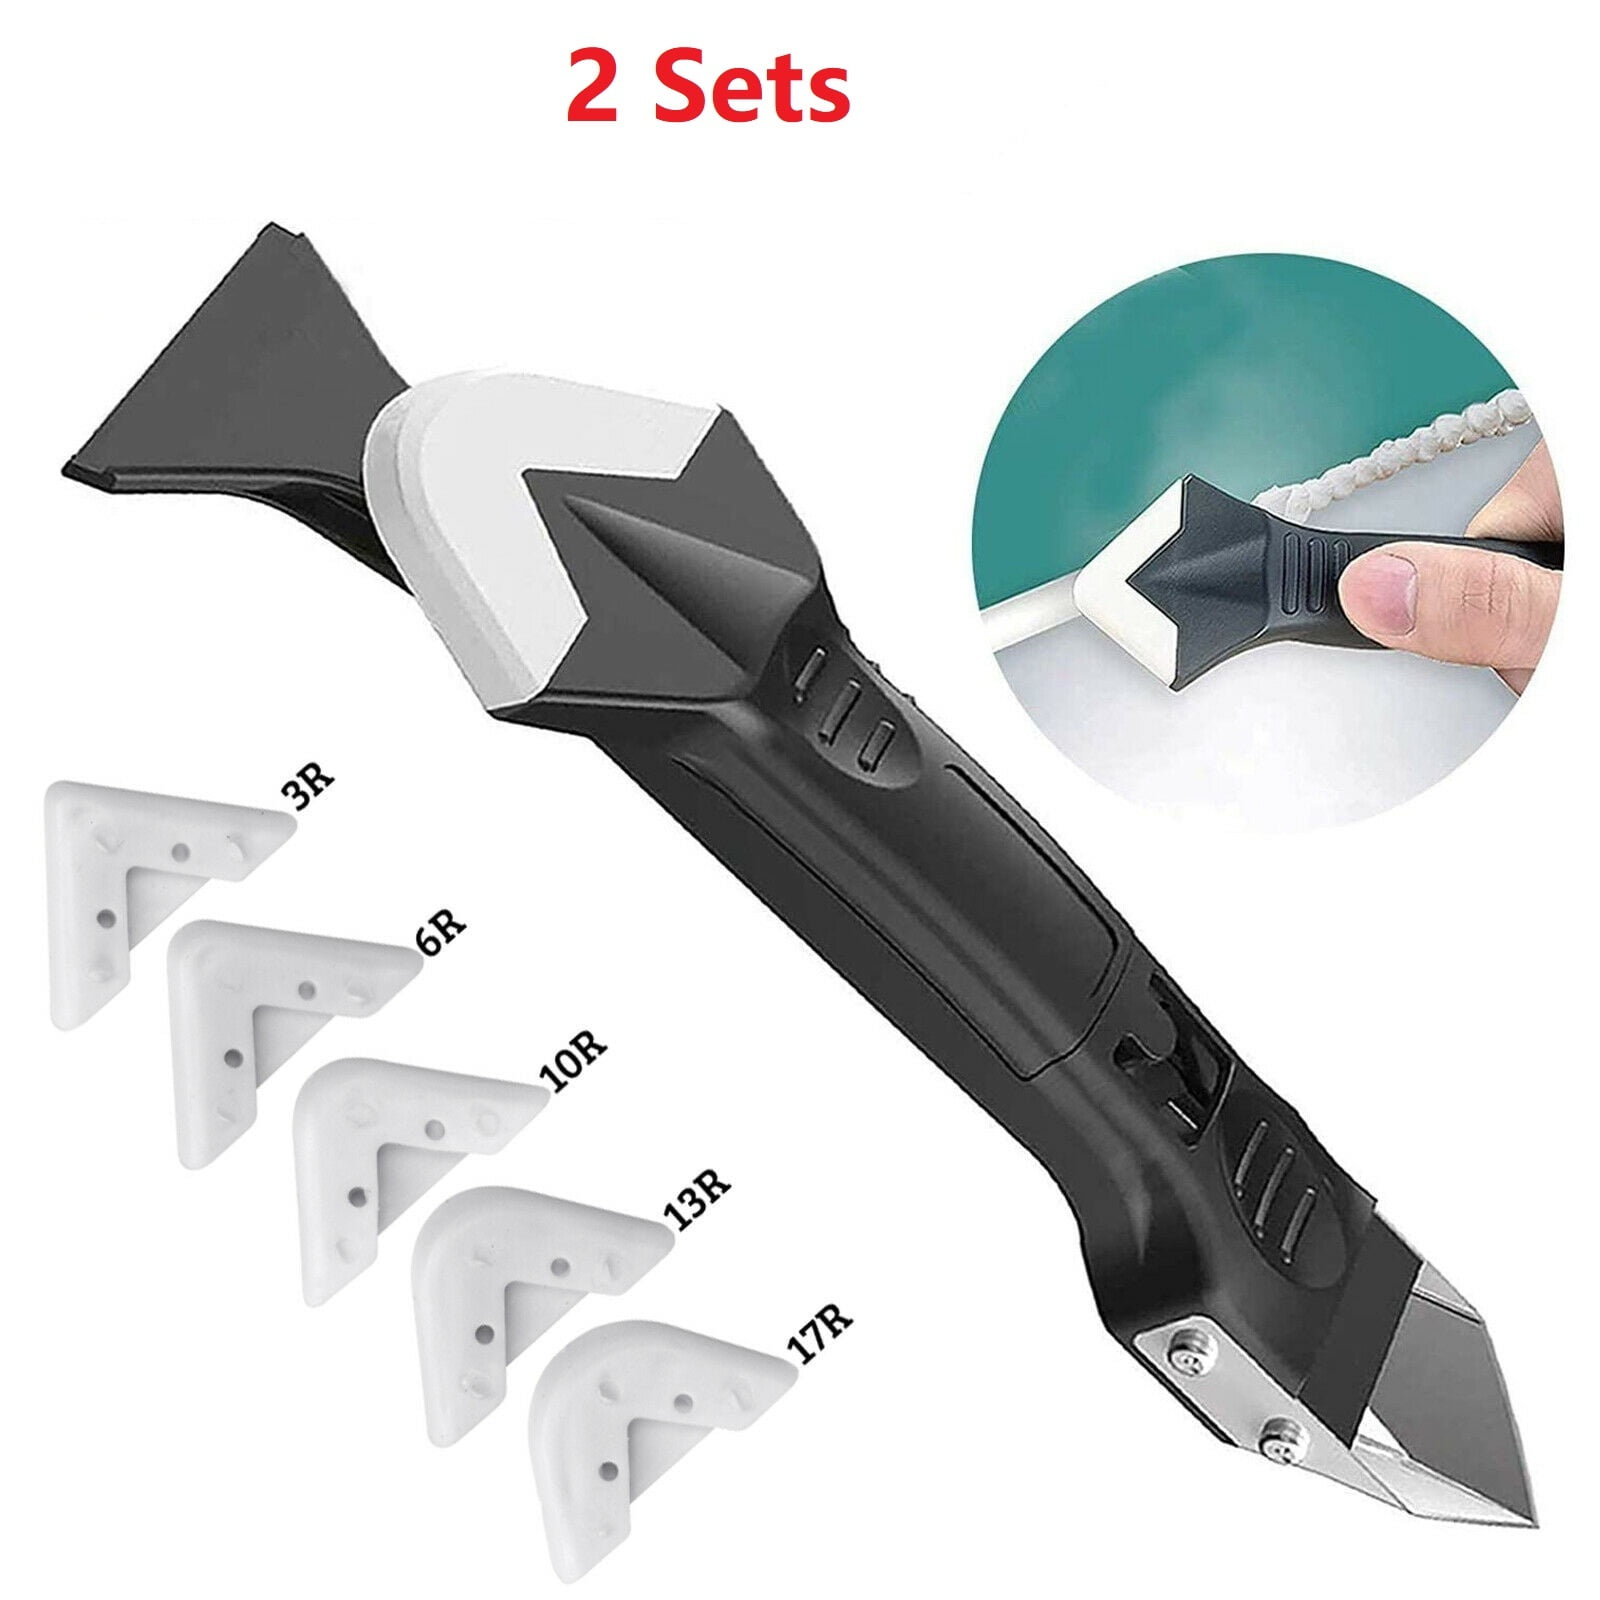 Professional Silicone Finishing Tool Silicone Spreading Tool Sealant  Spreader Forming Scraper with Caulking Kit Tool Set